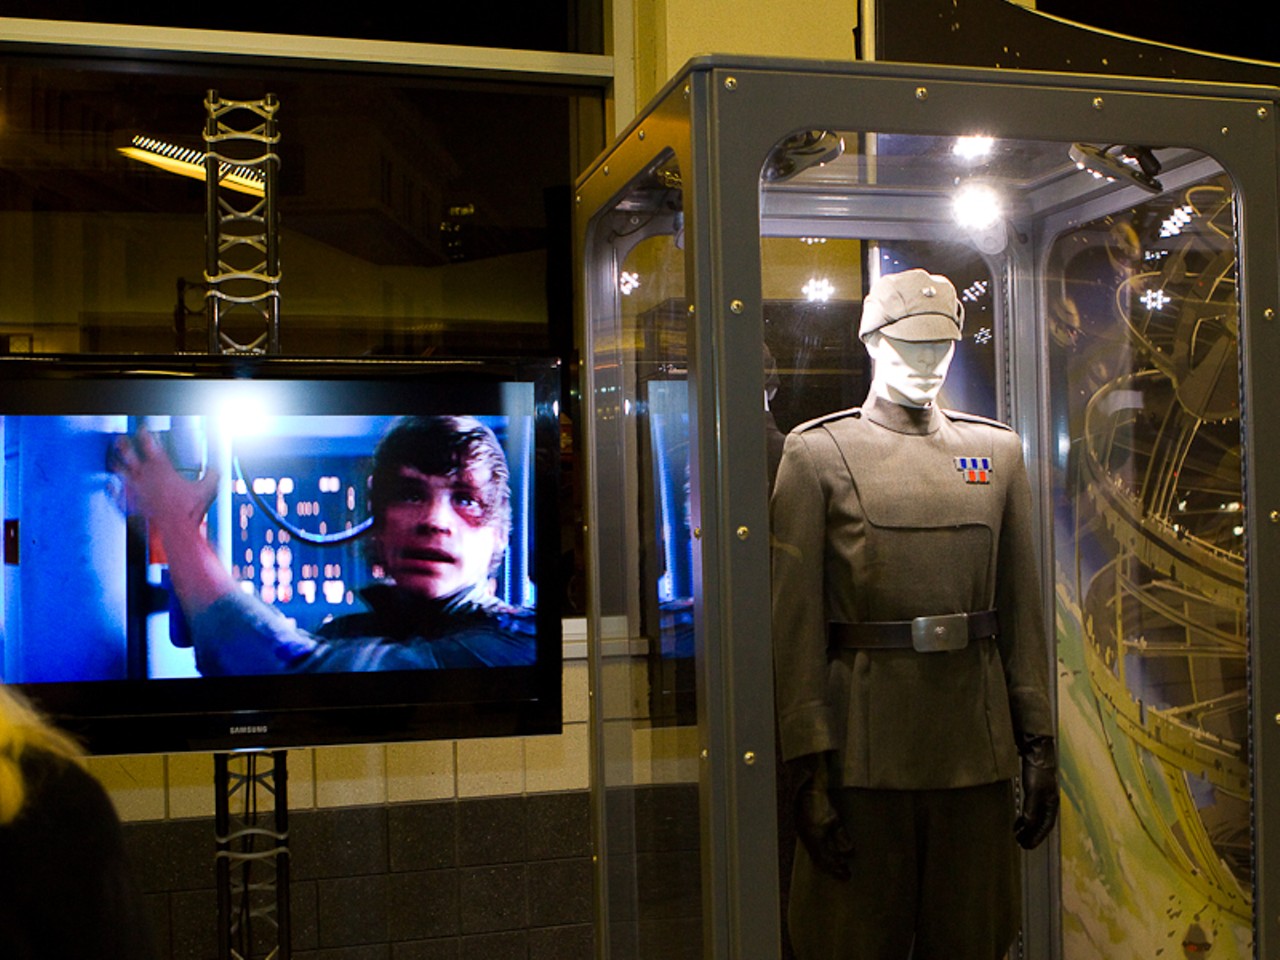 Scenes from the Star Wars movies were playing on huge TV's alongside costumes and props used in the movies.